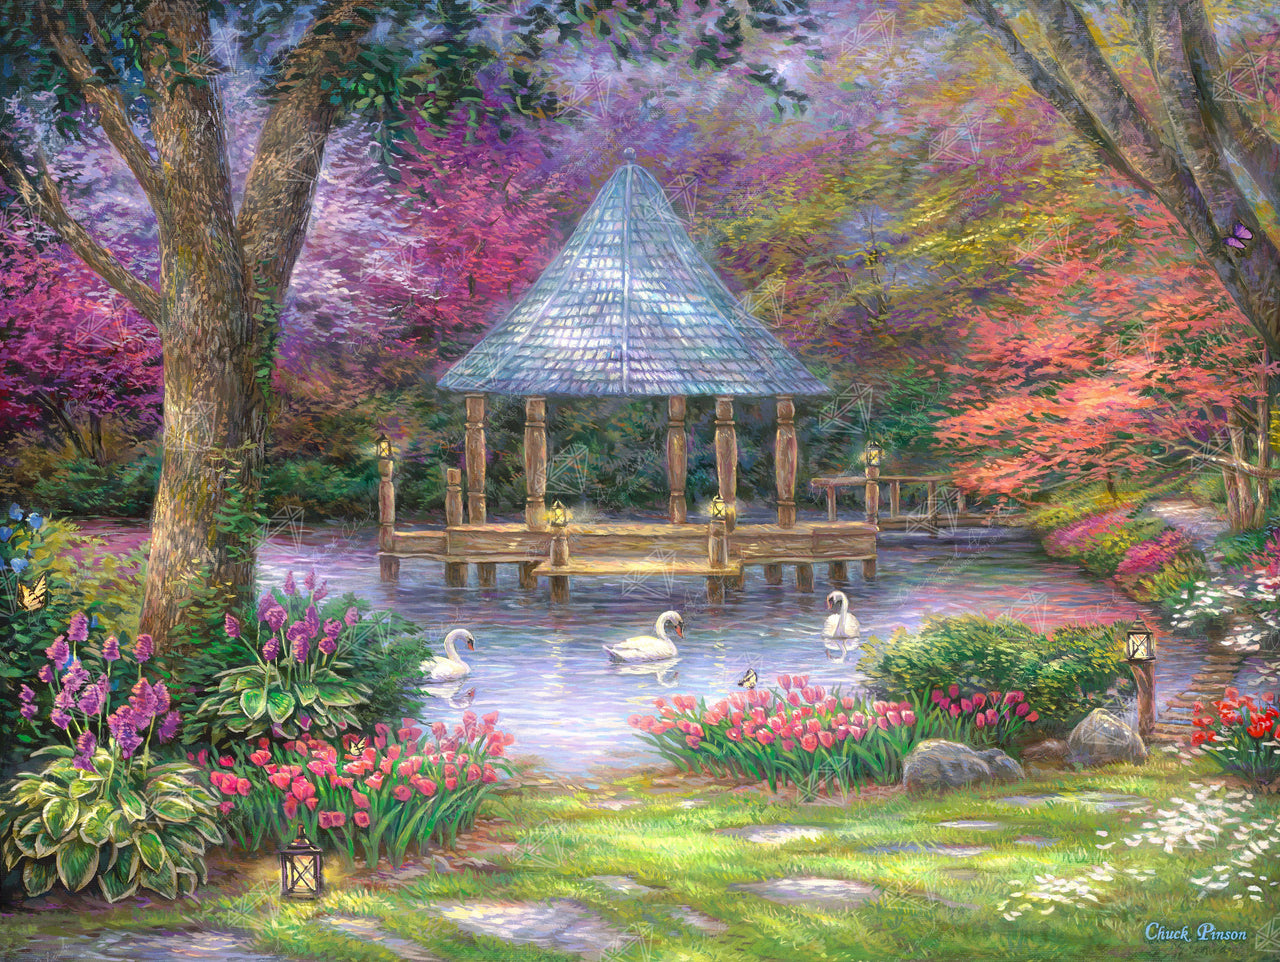 Diamond Painting Swan Pond 29" x 22" (74cm x 56cm) / Square With 65 Colors Including 4 ABs / 64,974